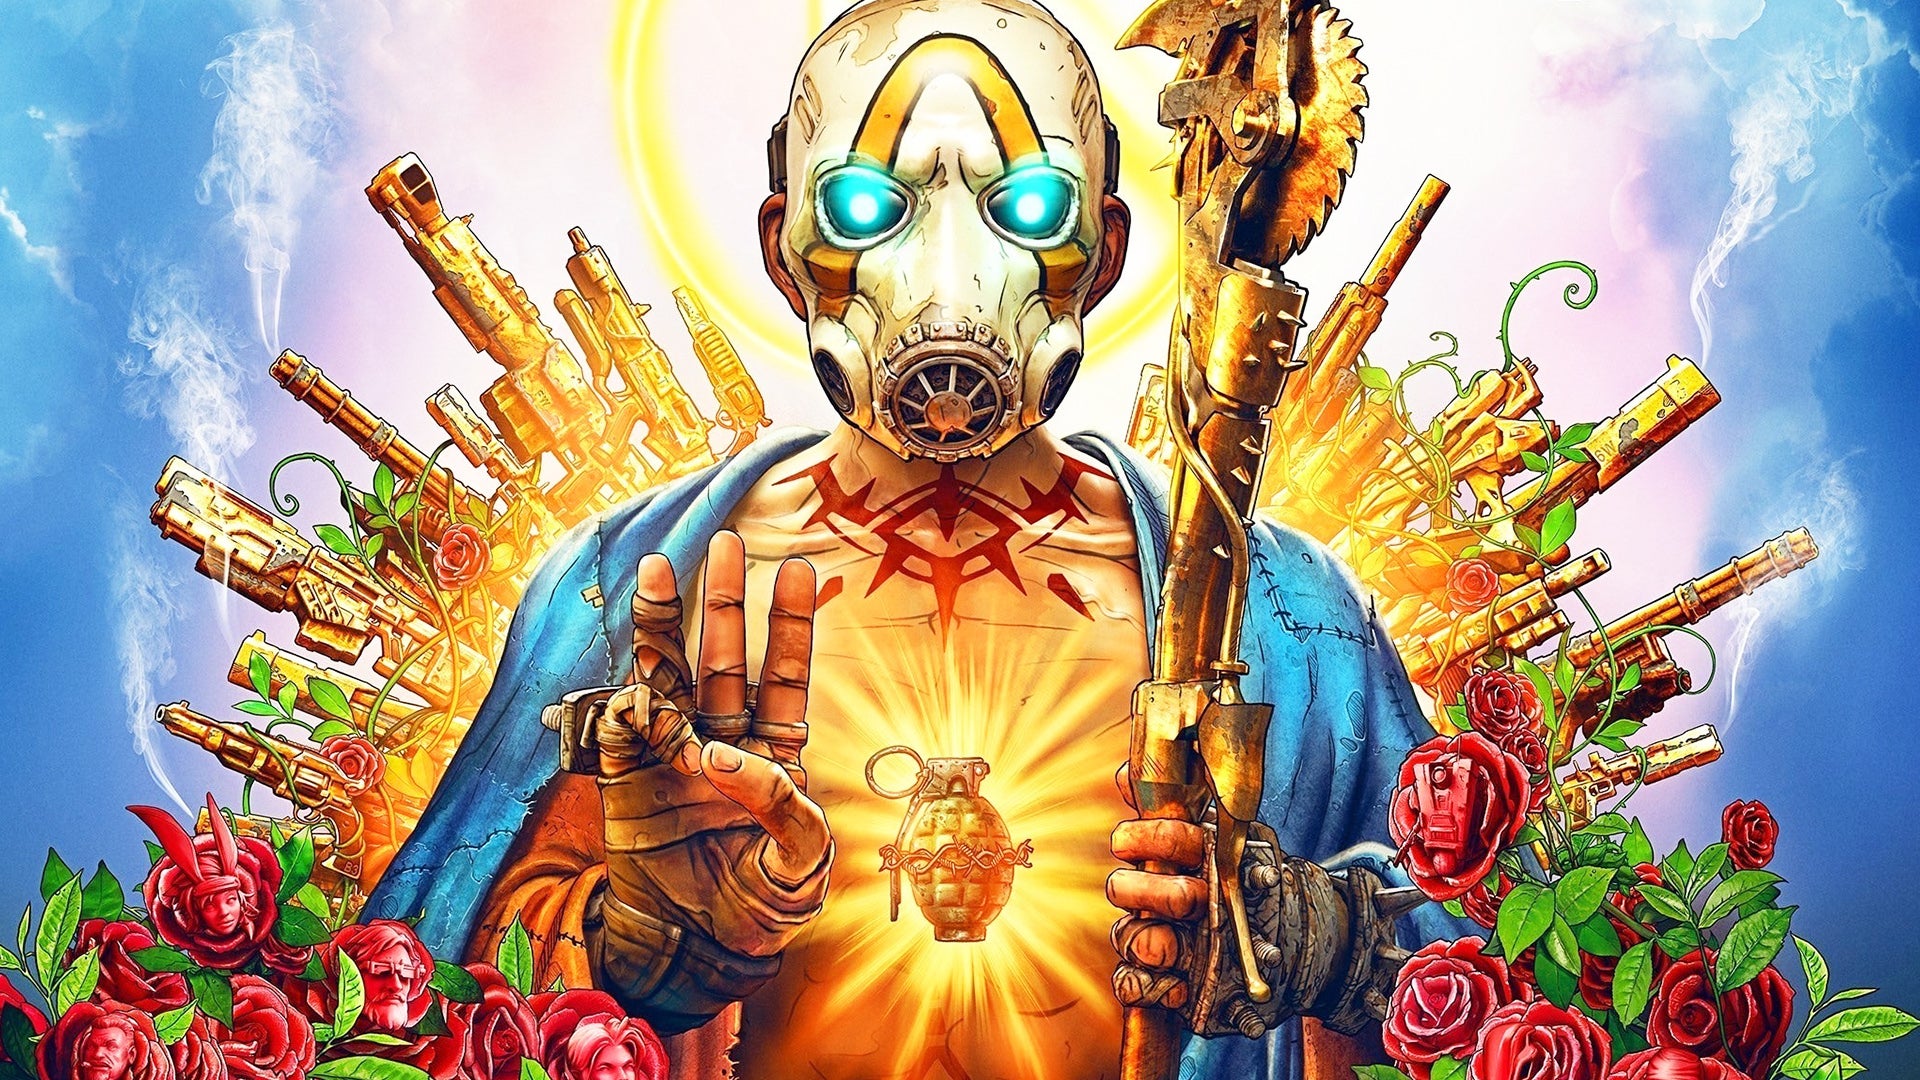 Image for Borderlands 3 PS5 vs Xbox Series X: 4K60 and 120fps Modes Tested - Plus Series S Comparisons!